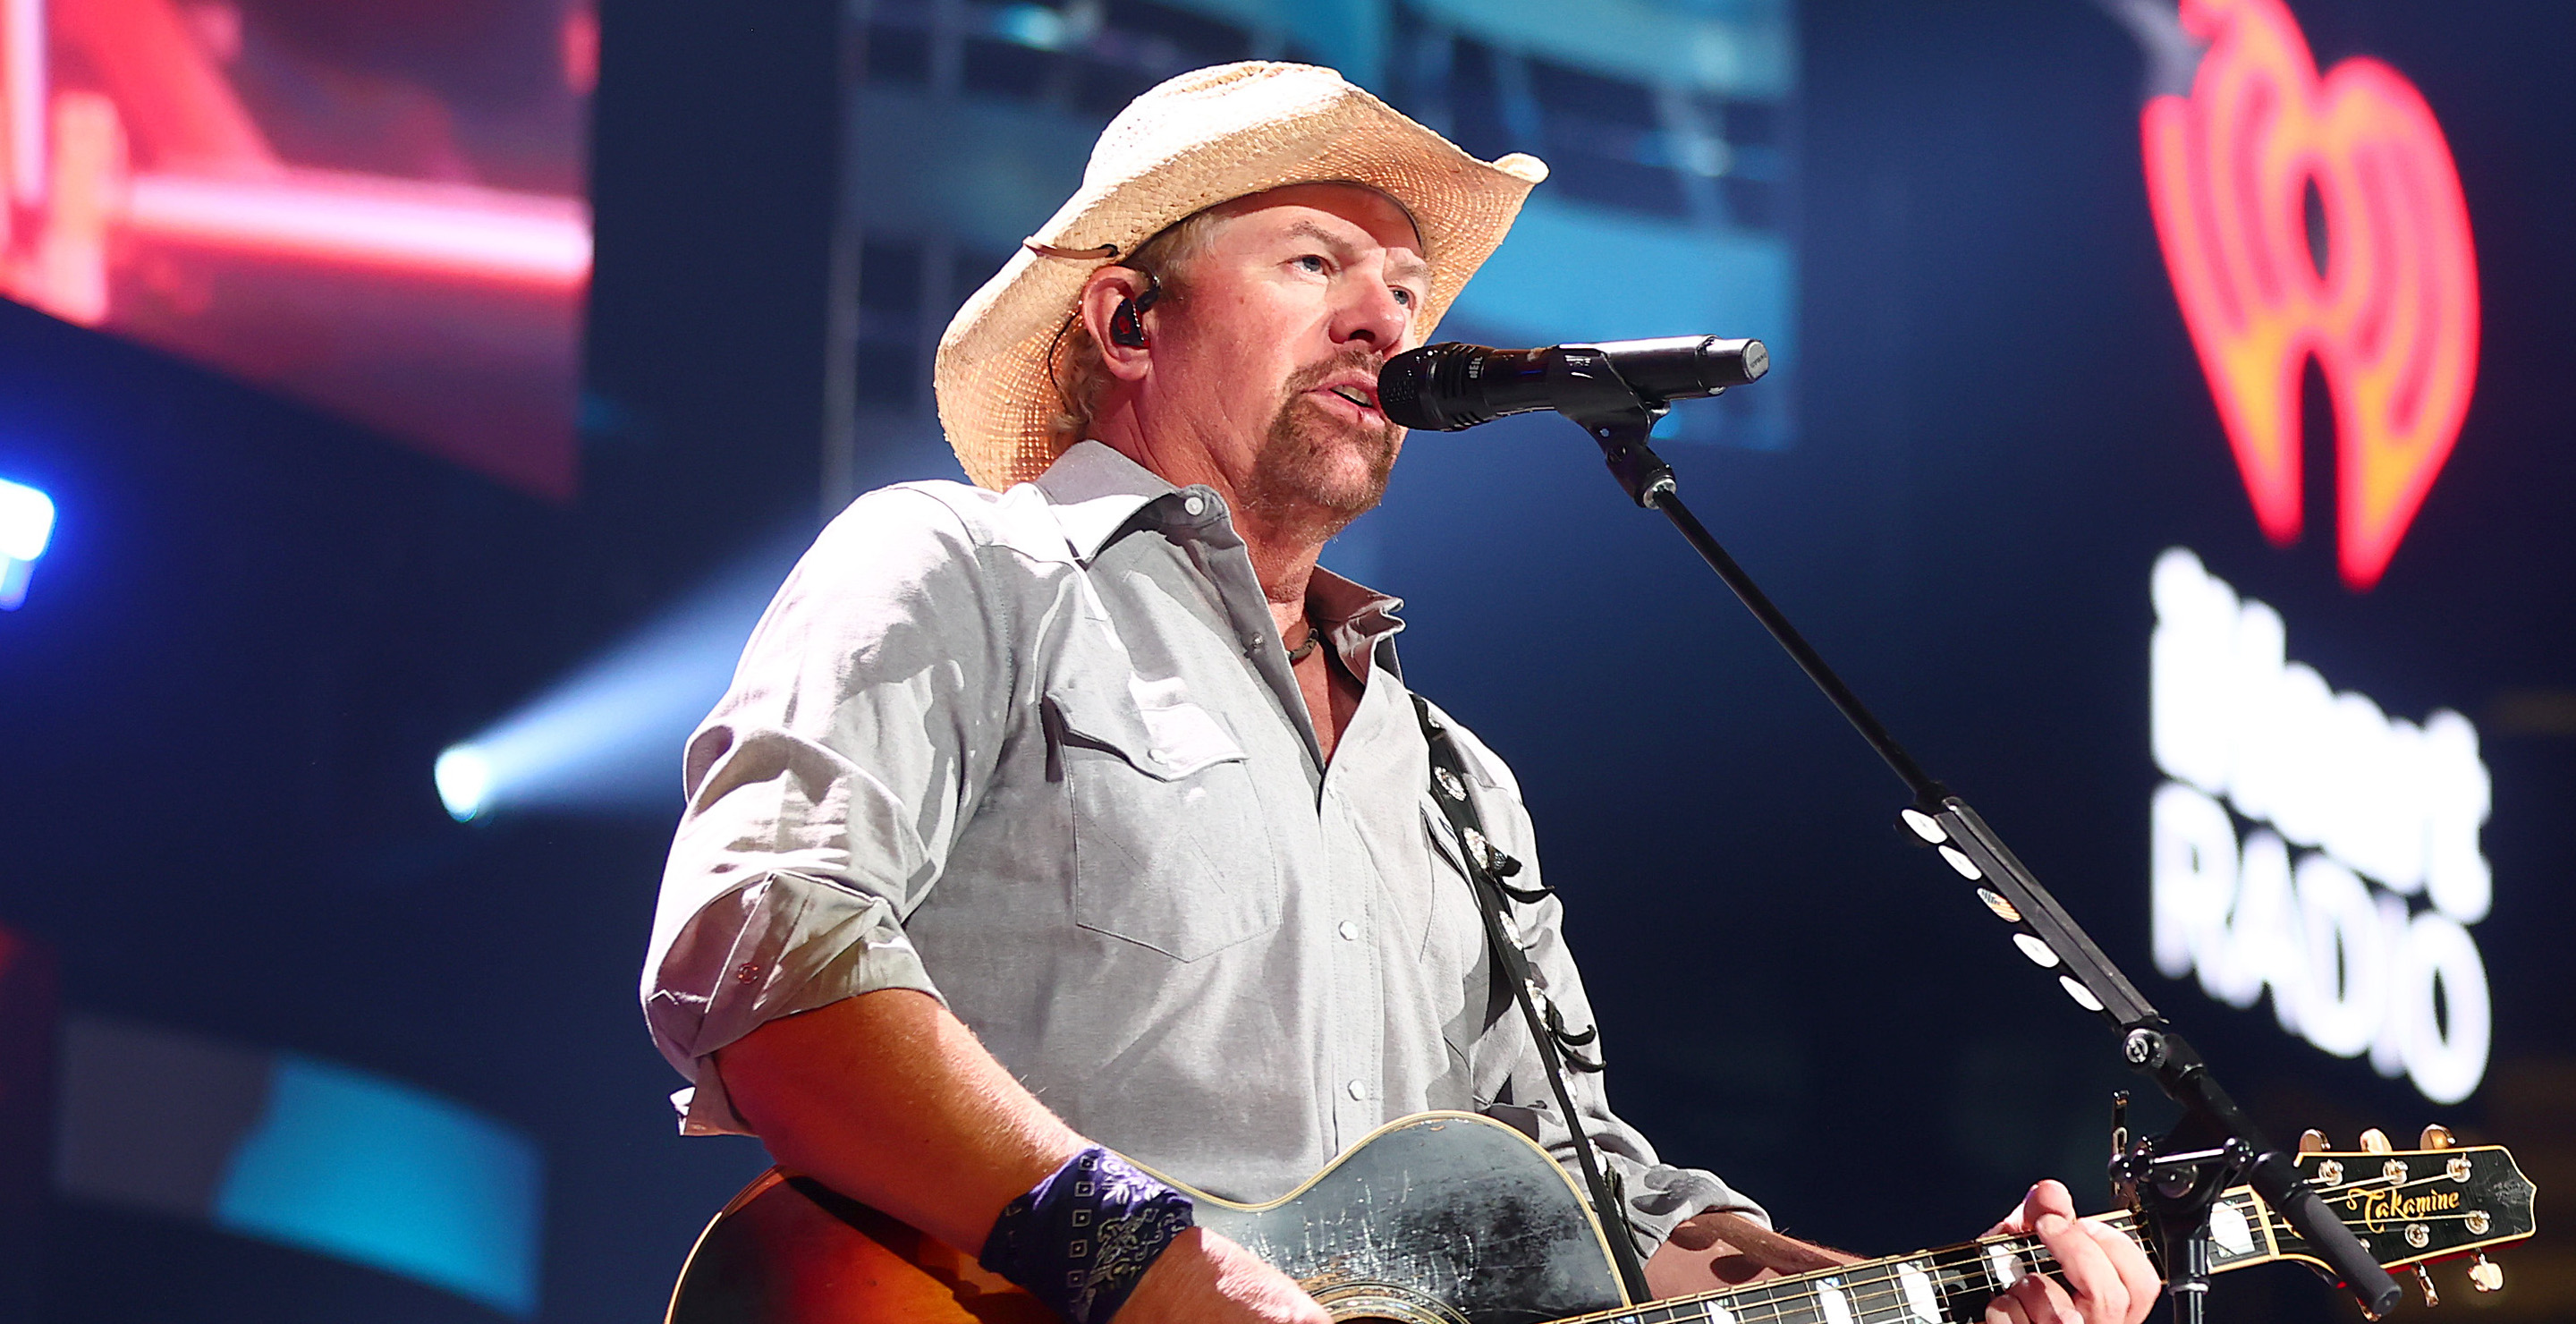 Toby Keith’s hometown and fans pay tribute to the late singer on July 4th